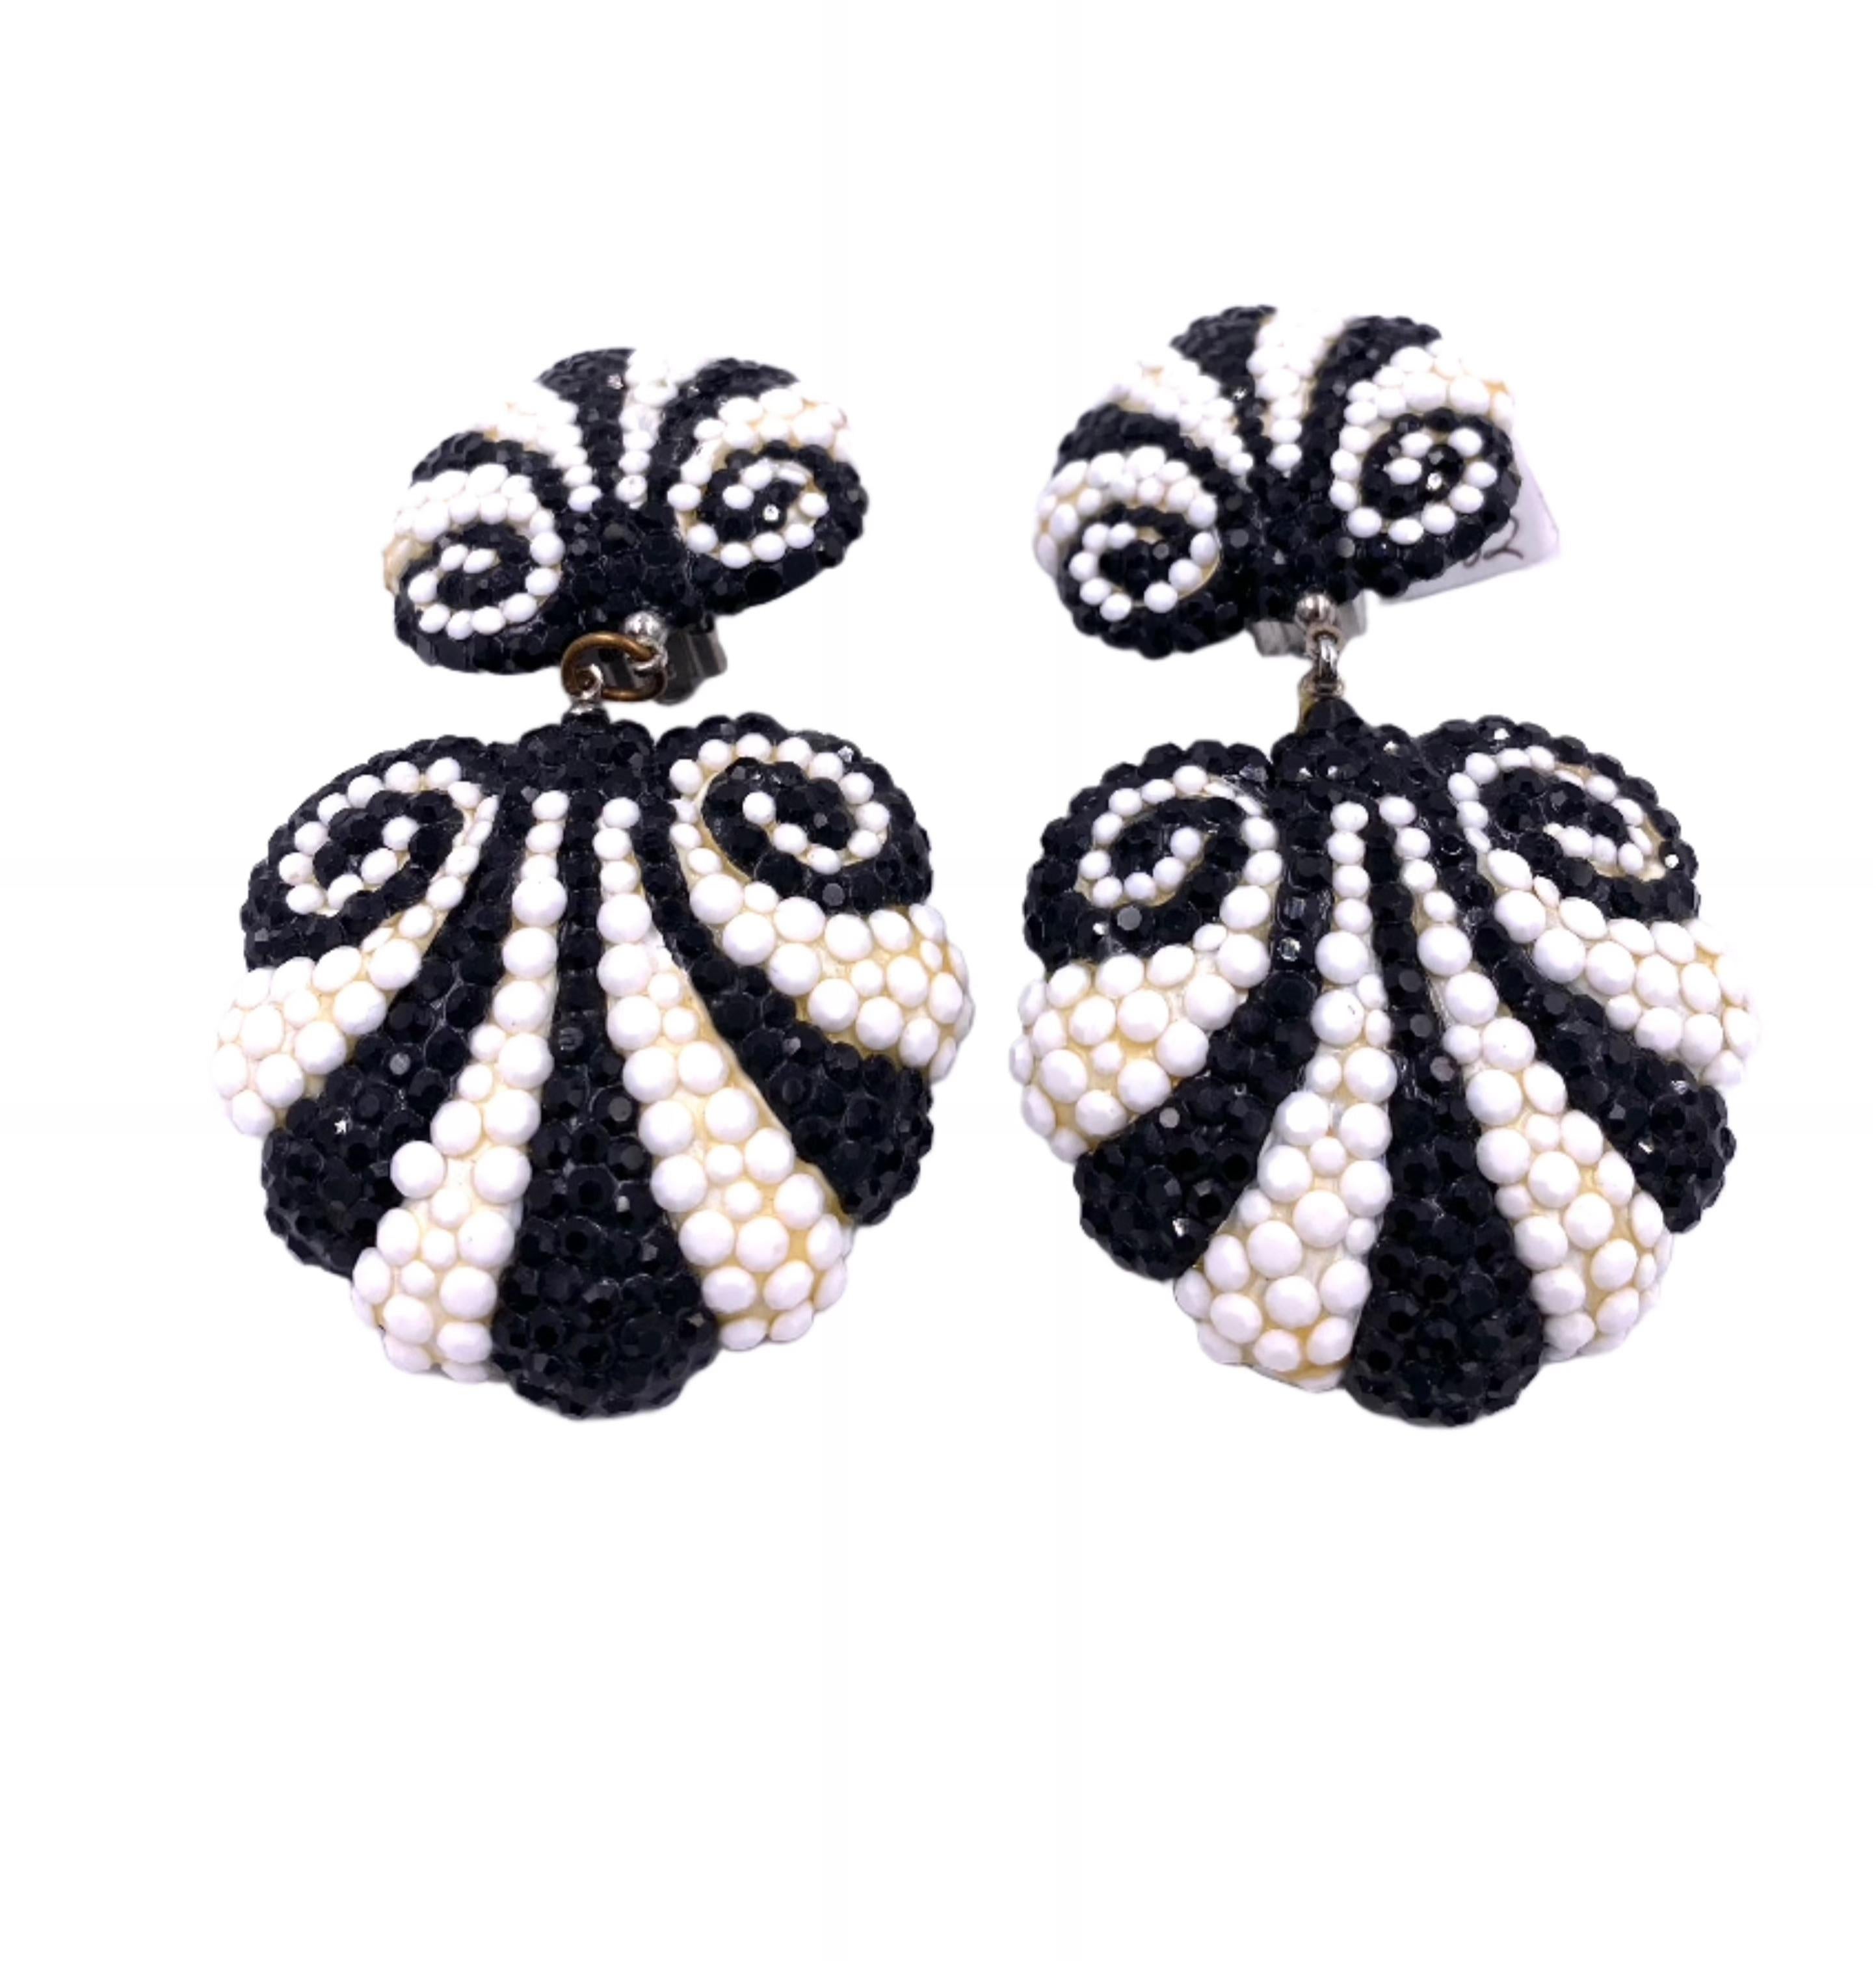 Add a touch of elegance to any outfit with these Vintage Richard Kerr Black/White Beaded Drop Earrings. The intricate vintage beaded design, with its bold stripes, exudes sophistication and style. These statement earrings are a must-have for any